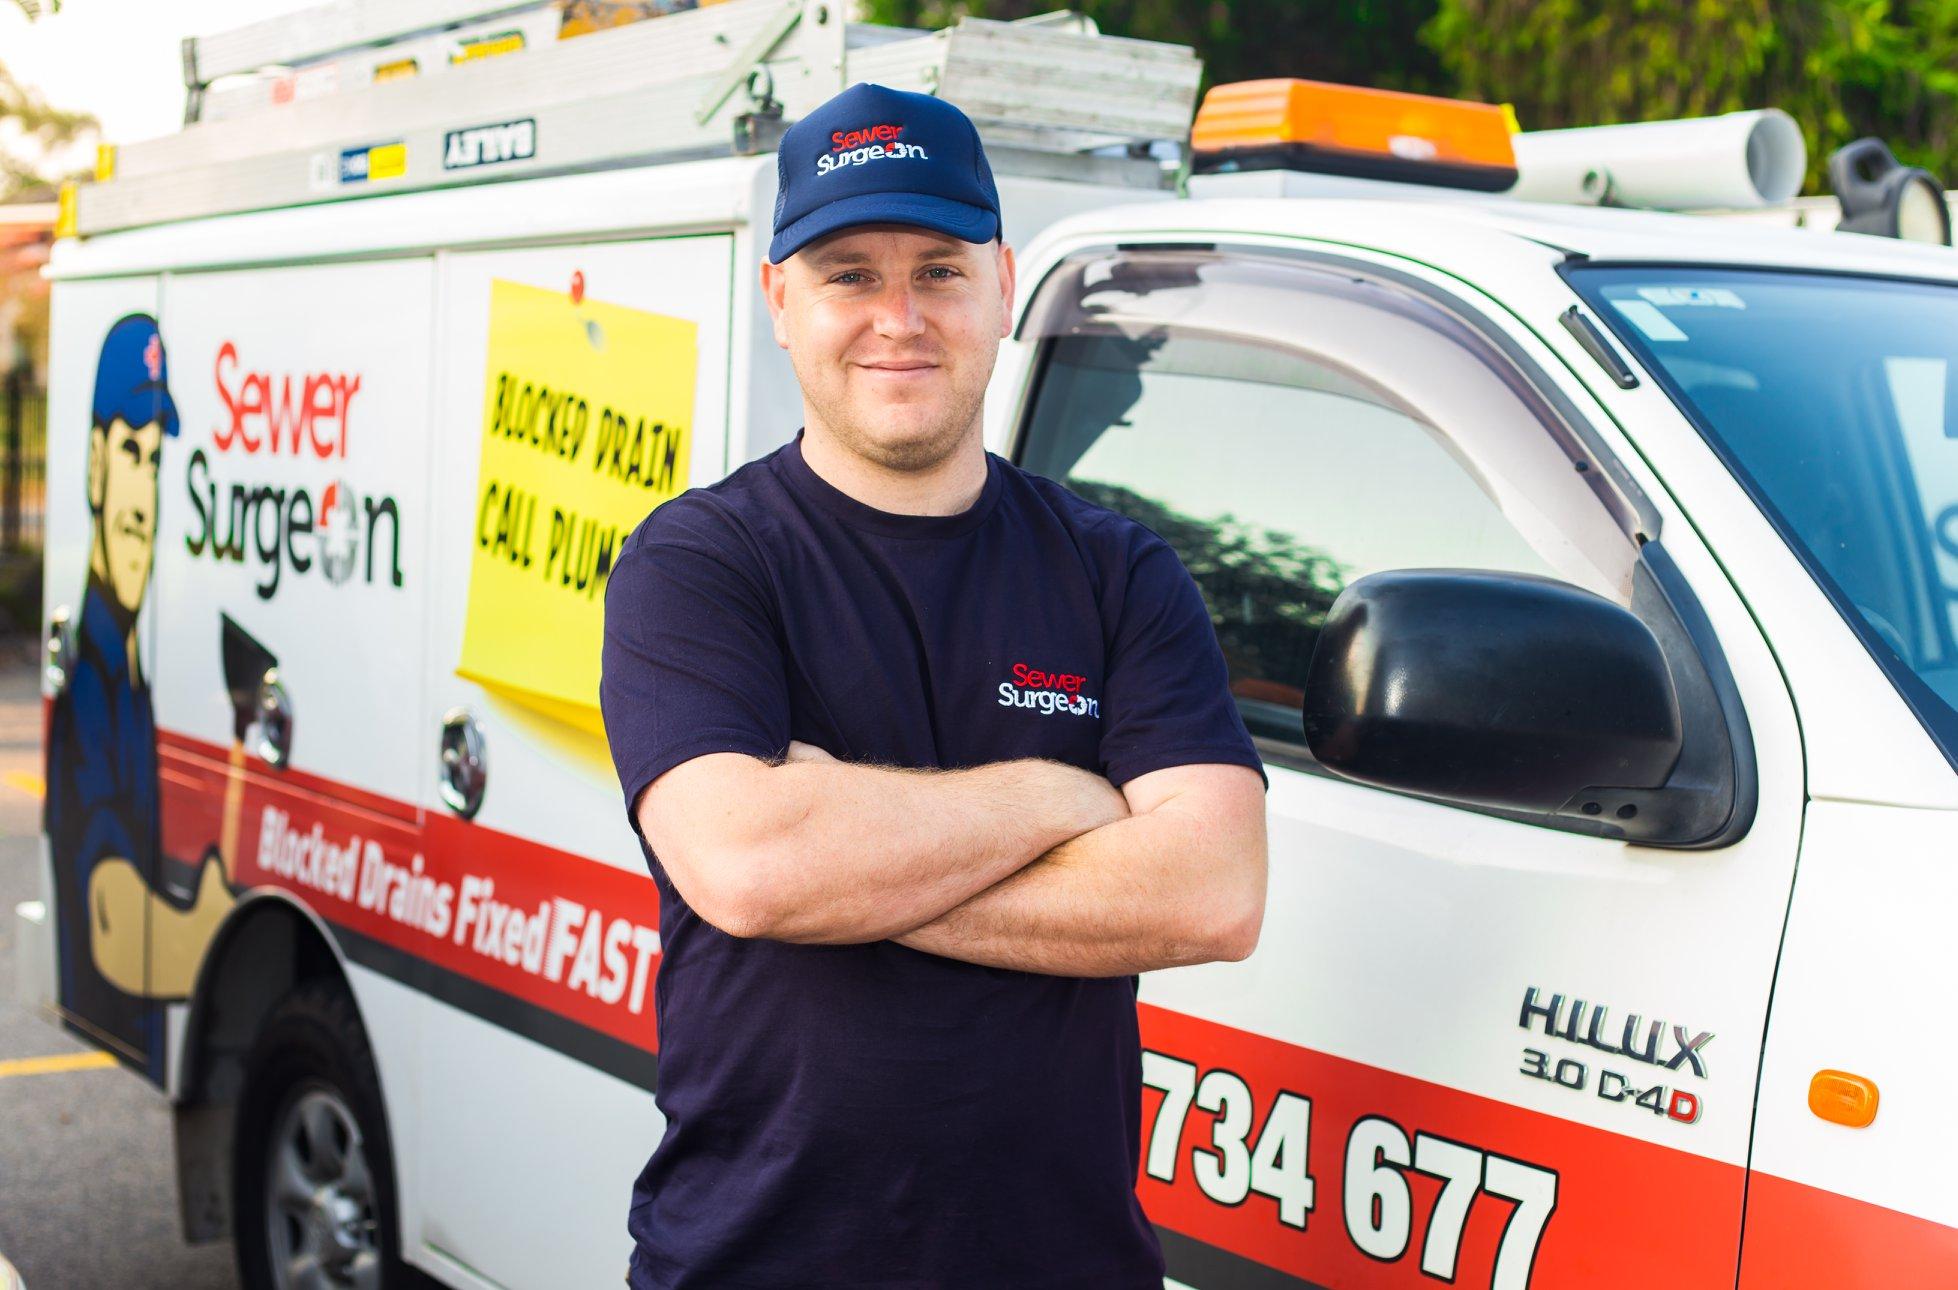 Hire Marrickville's Best Plumber To Inspect Your Drains & Sewer System